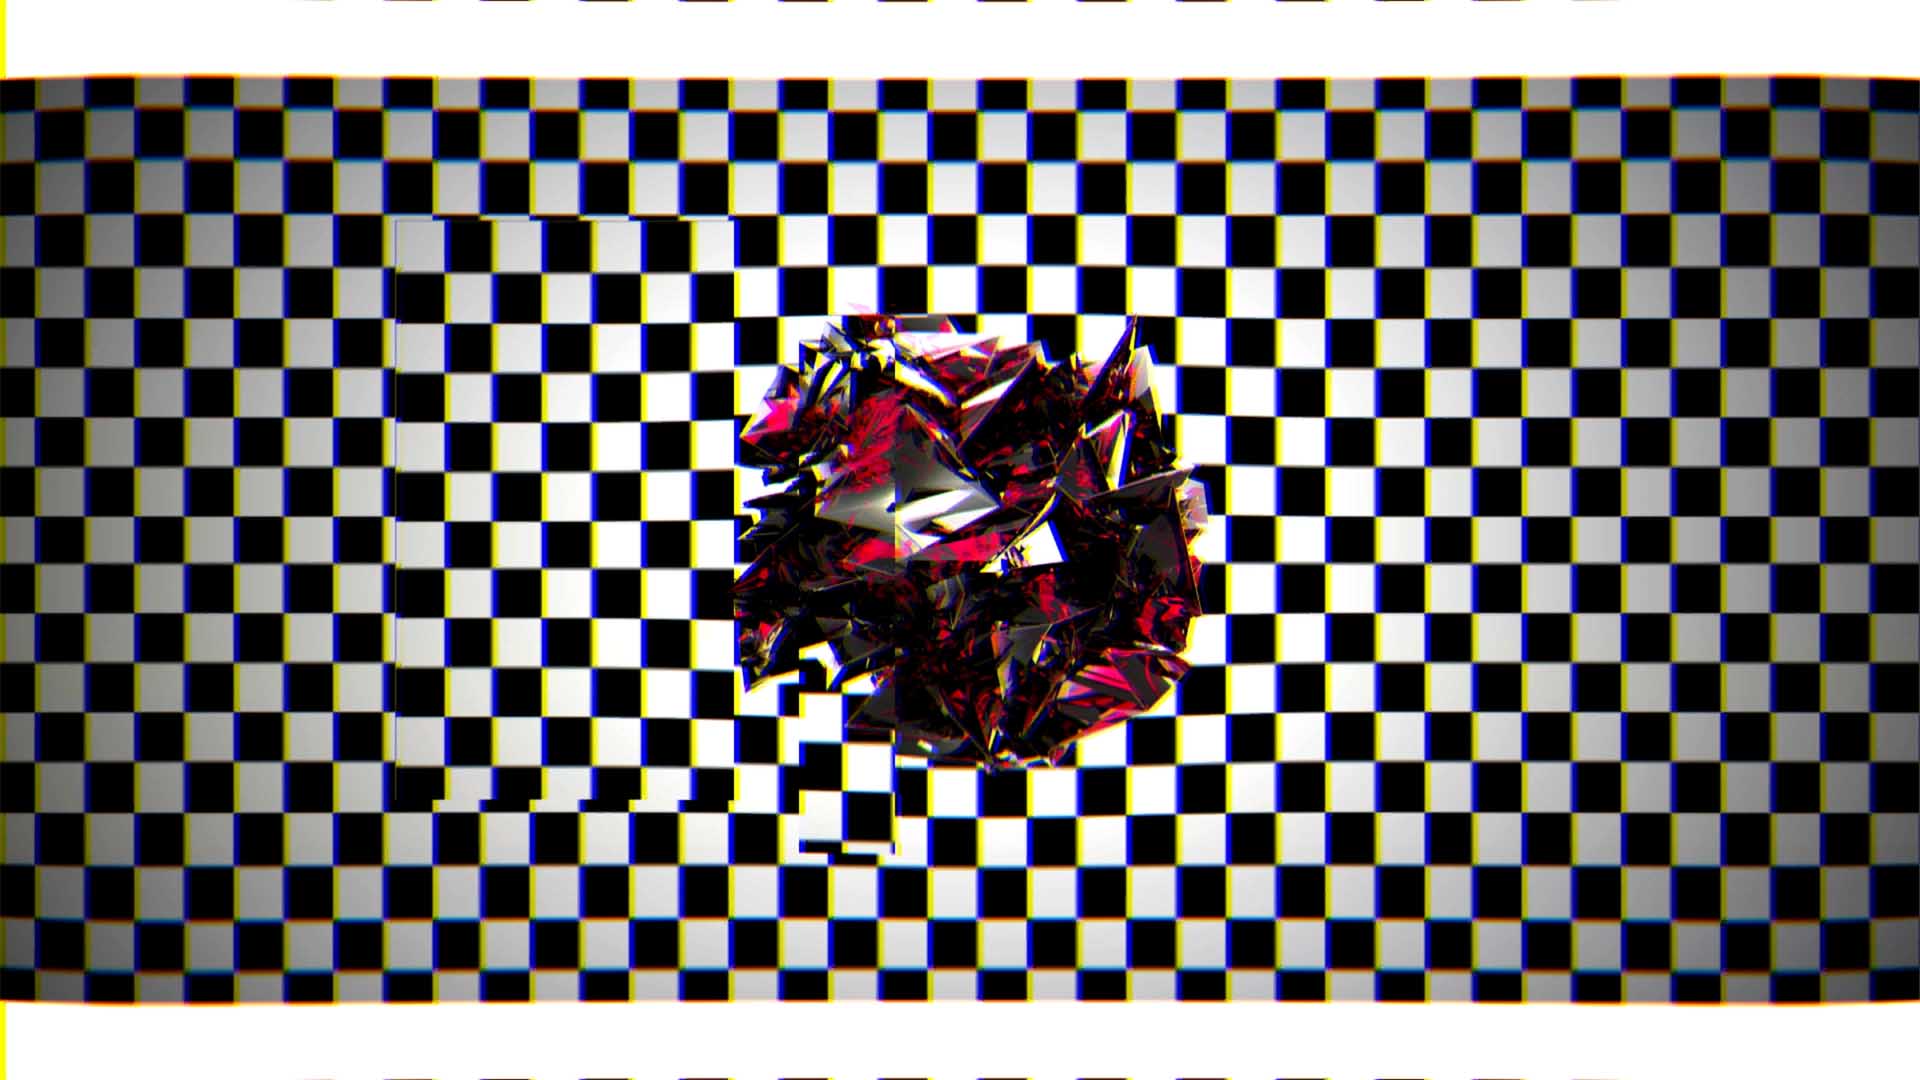 Glitch_Backgrounds_Animated_Motion_Background_Glitched_Vj_Loop_Video